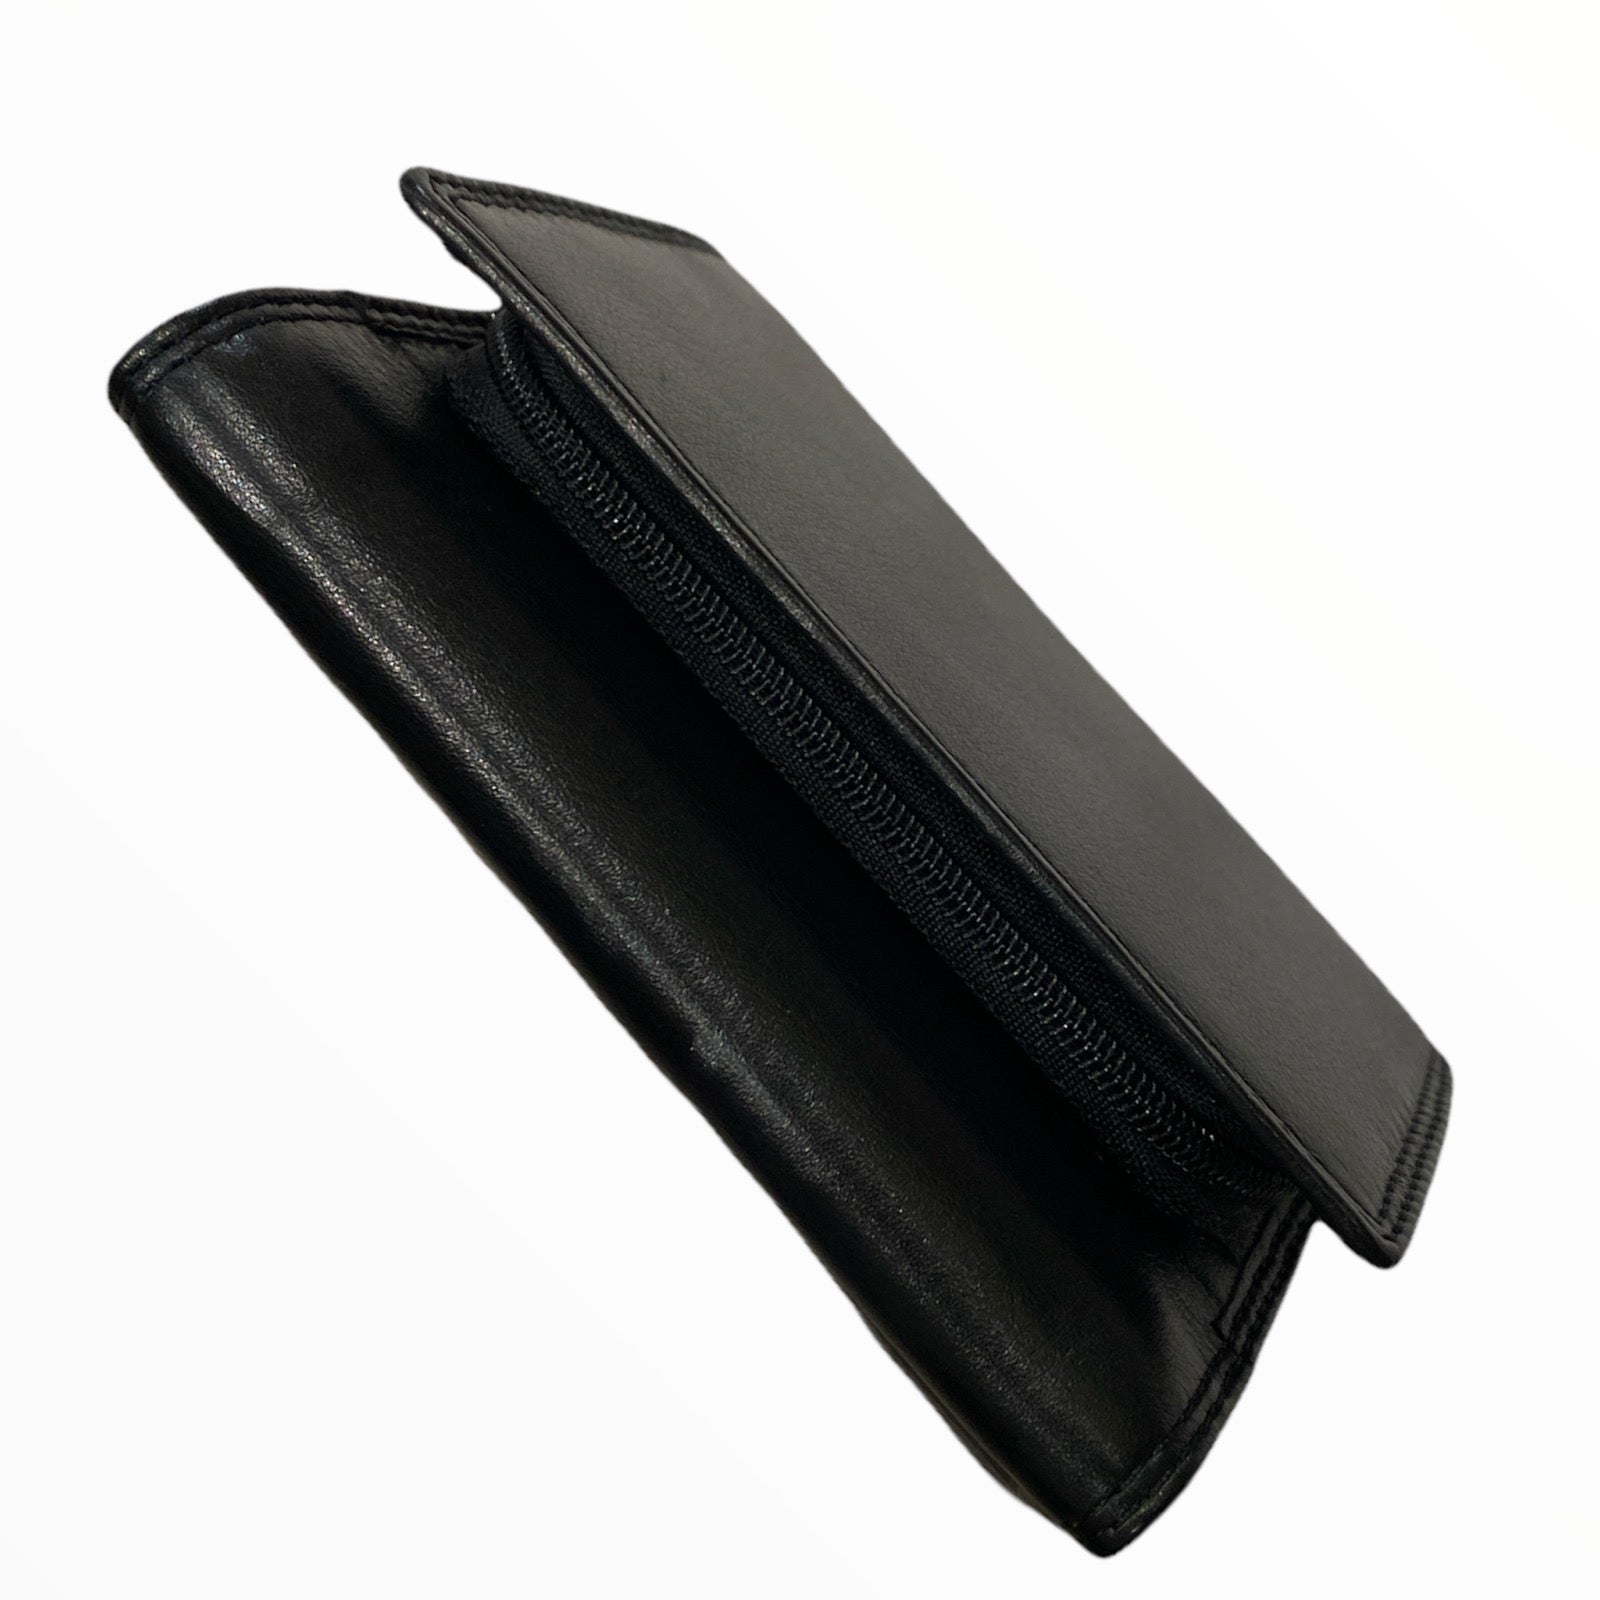 Black leather wallet small size